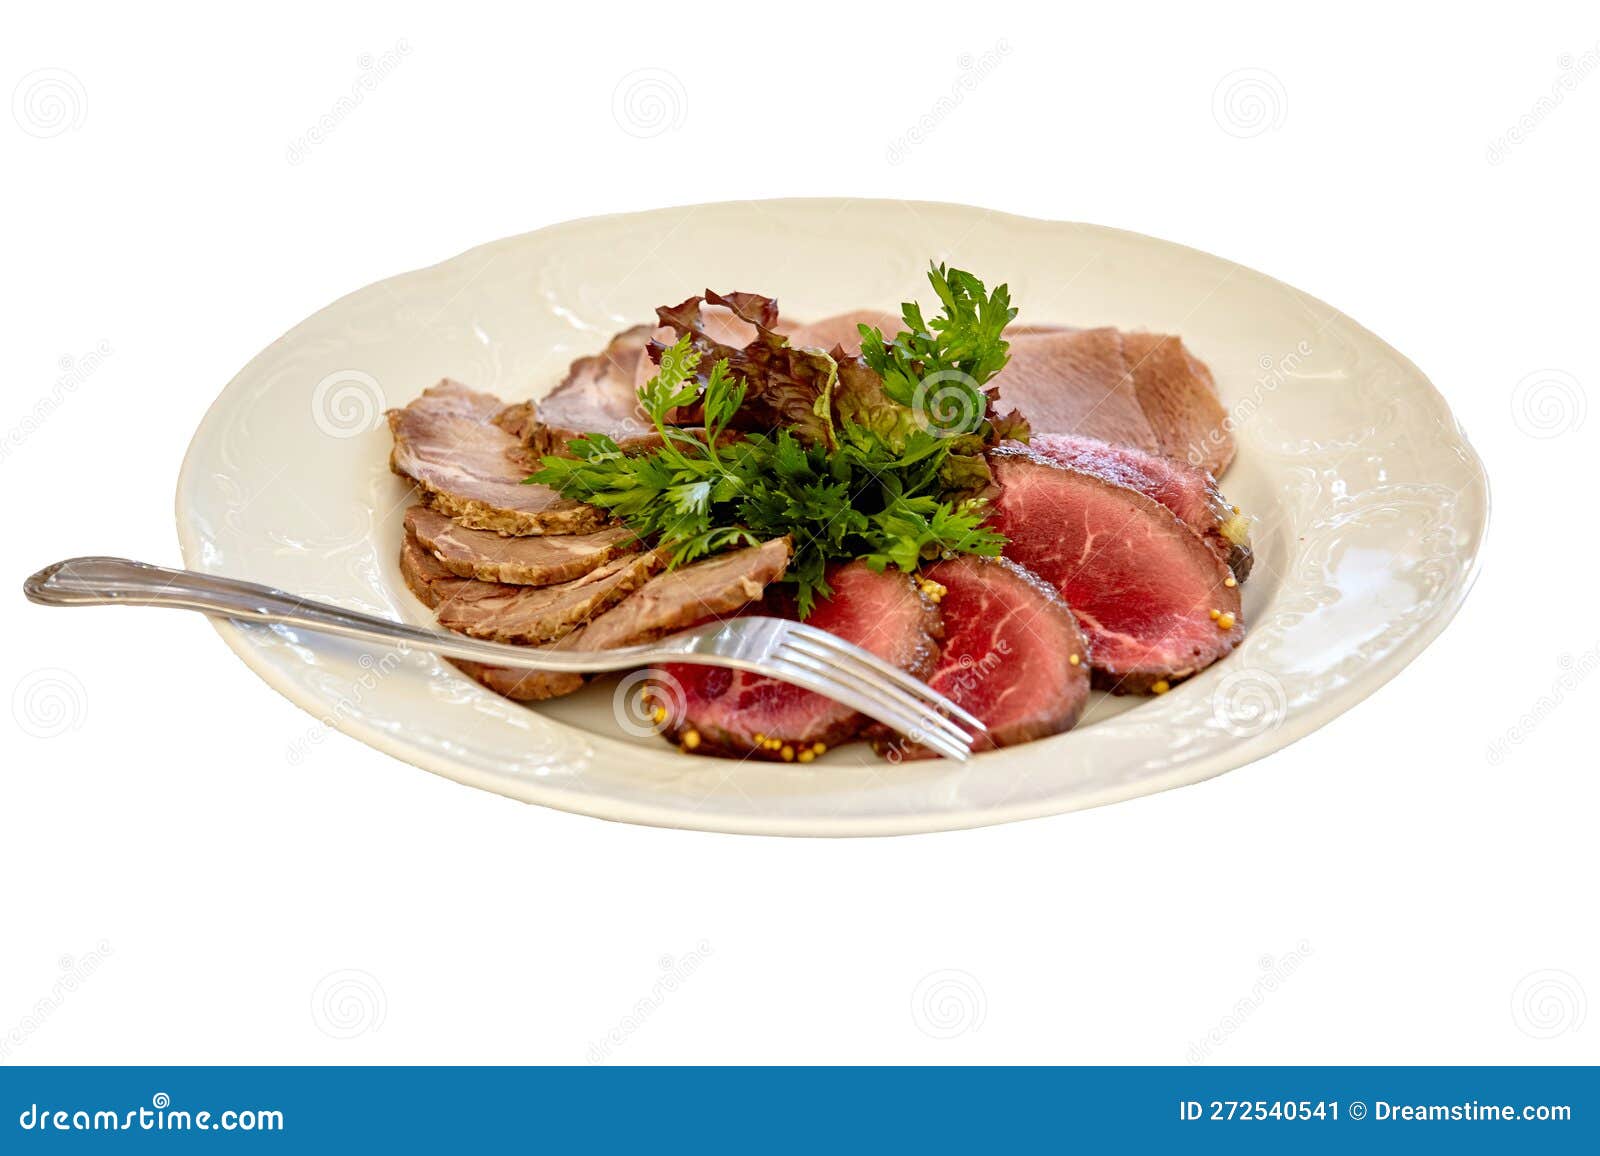 Appetizer Plate with a Meat Selection. Sliced Baked Ham Stock Image ...